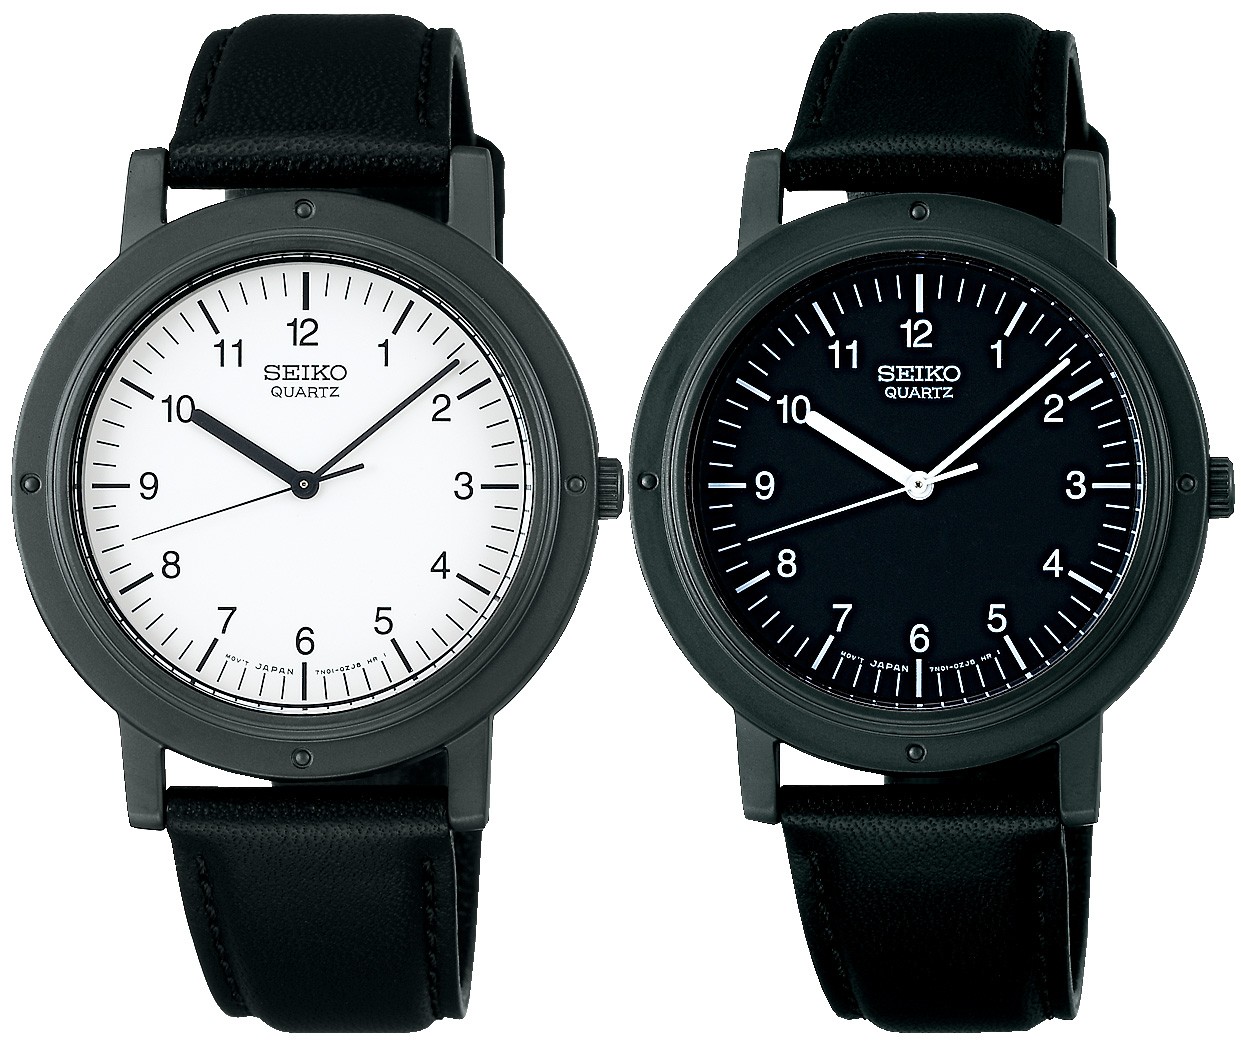 Seiko resurrects the wristwatch made famous by Steve Jobs | City Magazine